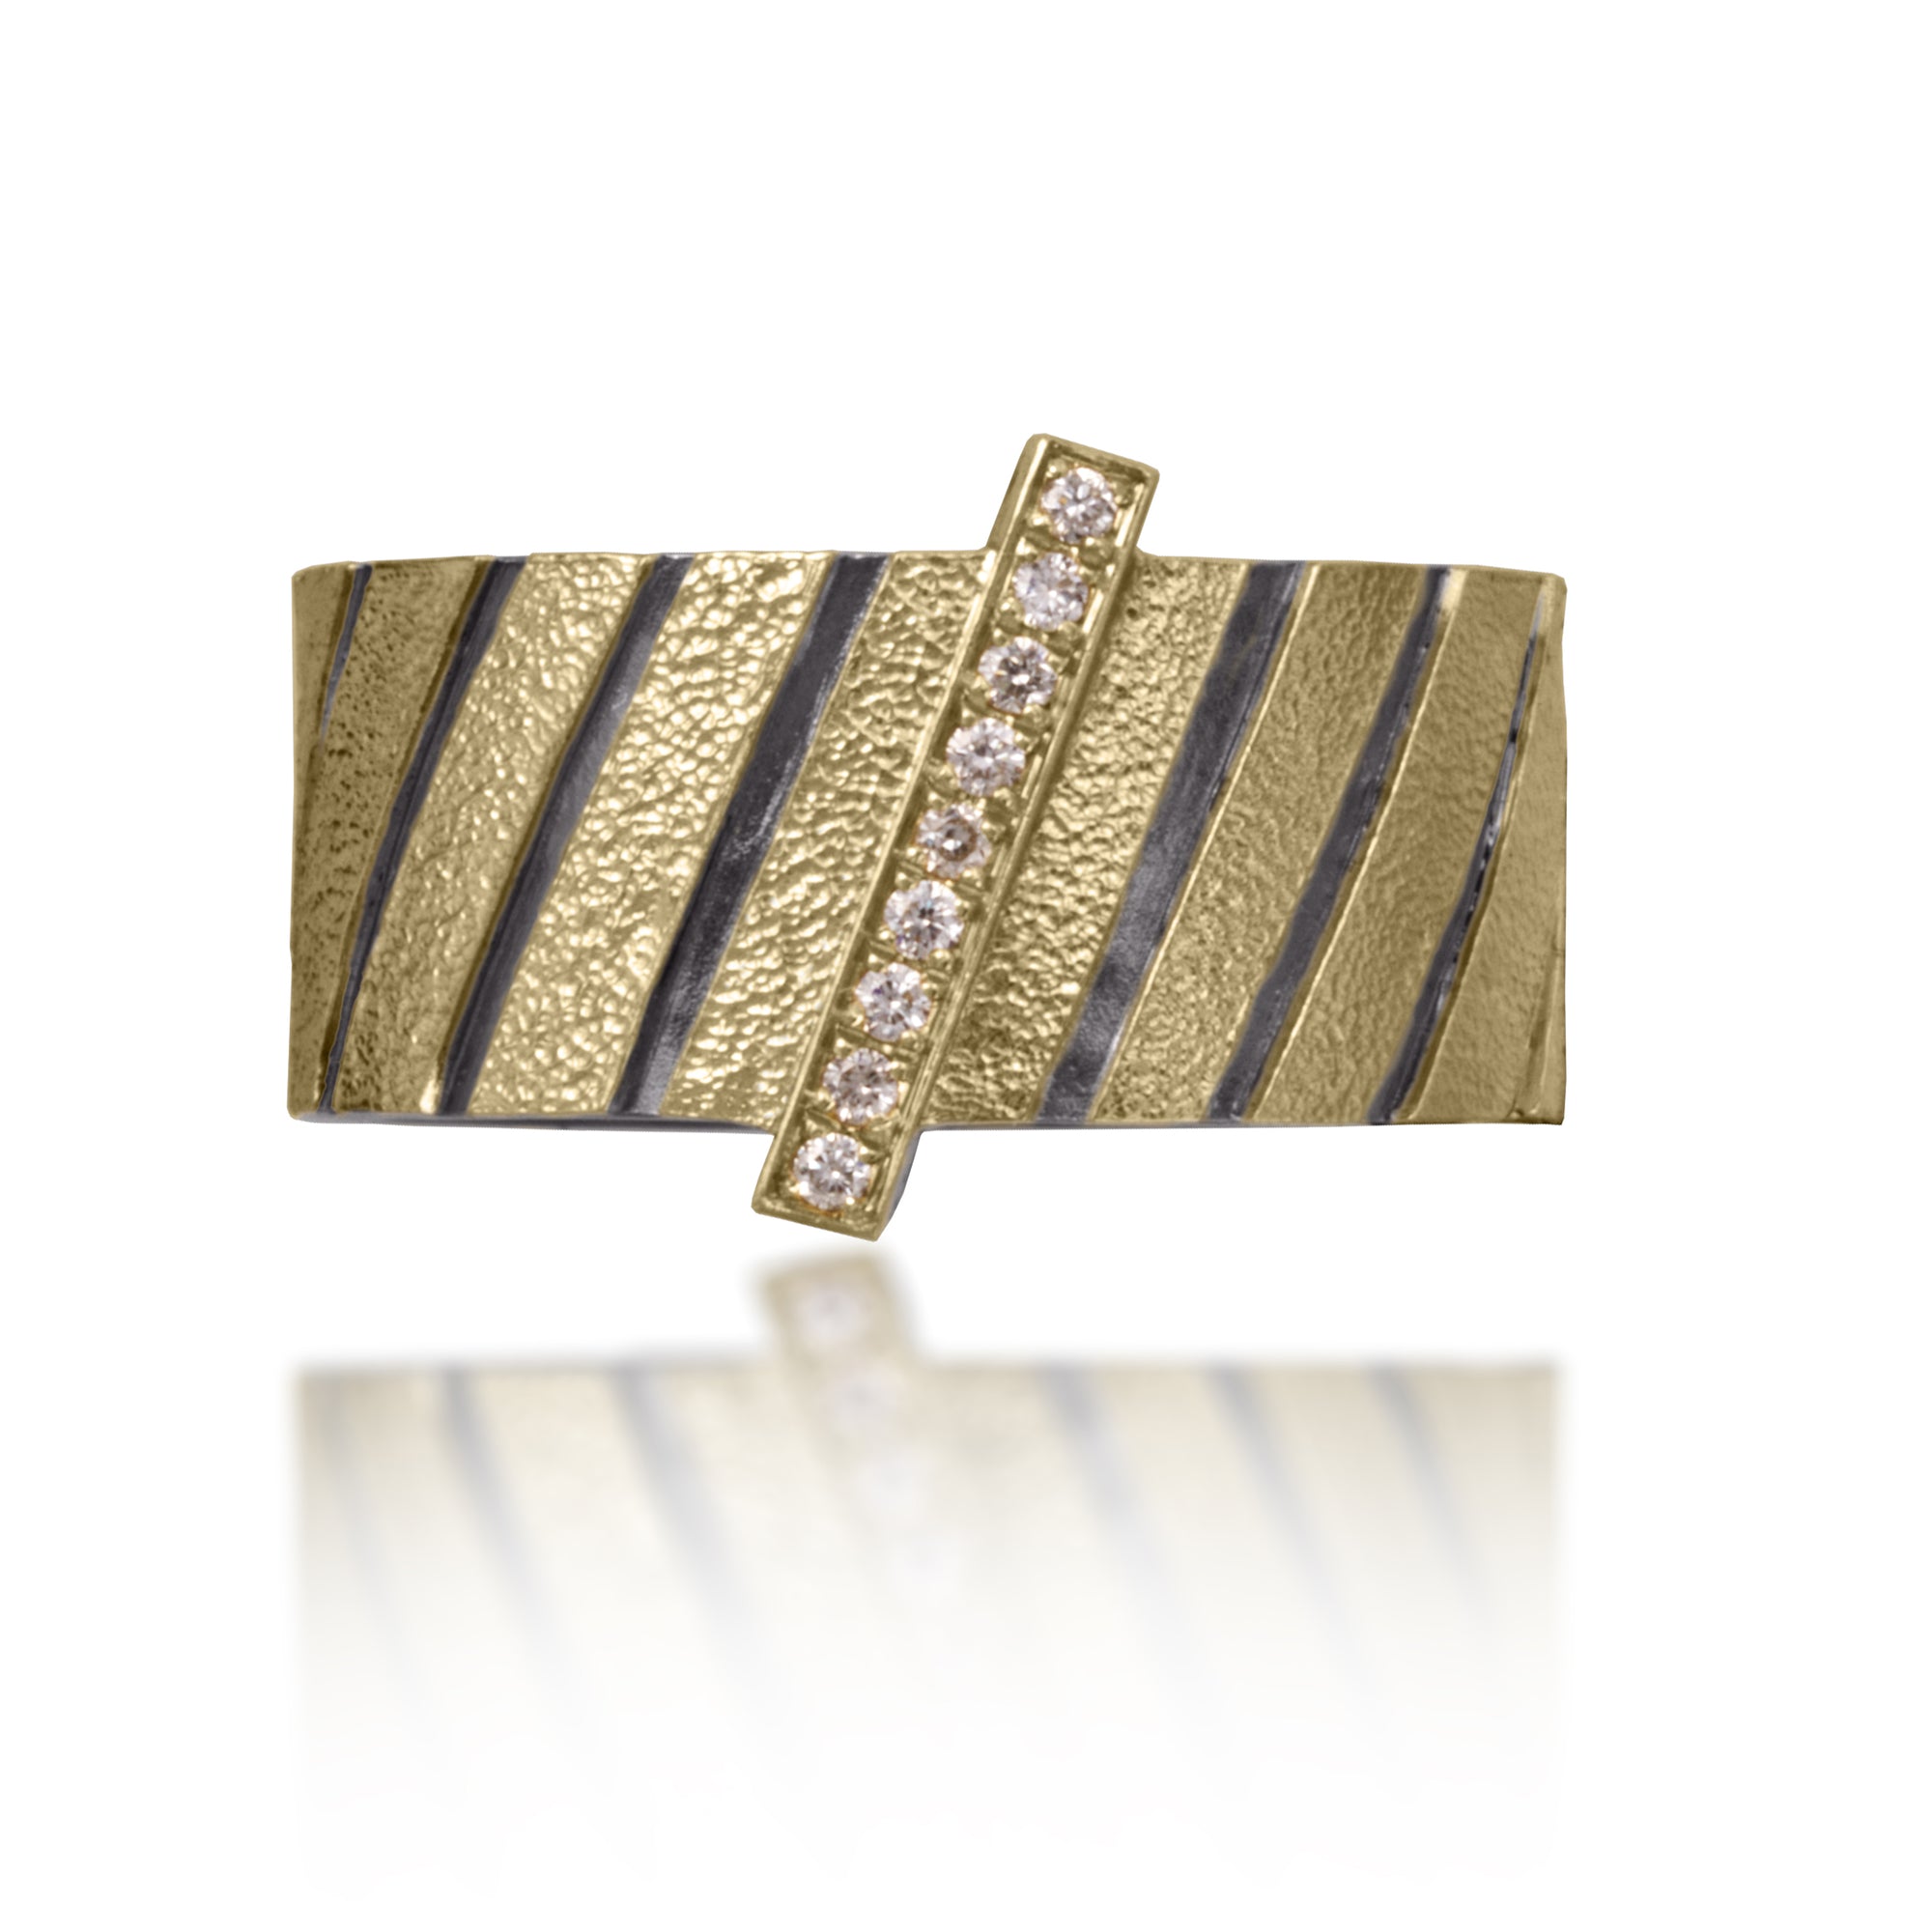 Stripe Ring #10 in 18k gold and oxidized sterling silver features a gold bar pave set with white diamonds. Hand fabricated, stipple textured and engraved mixed metals. 9mm wide straight band with angled stripes.